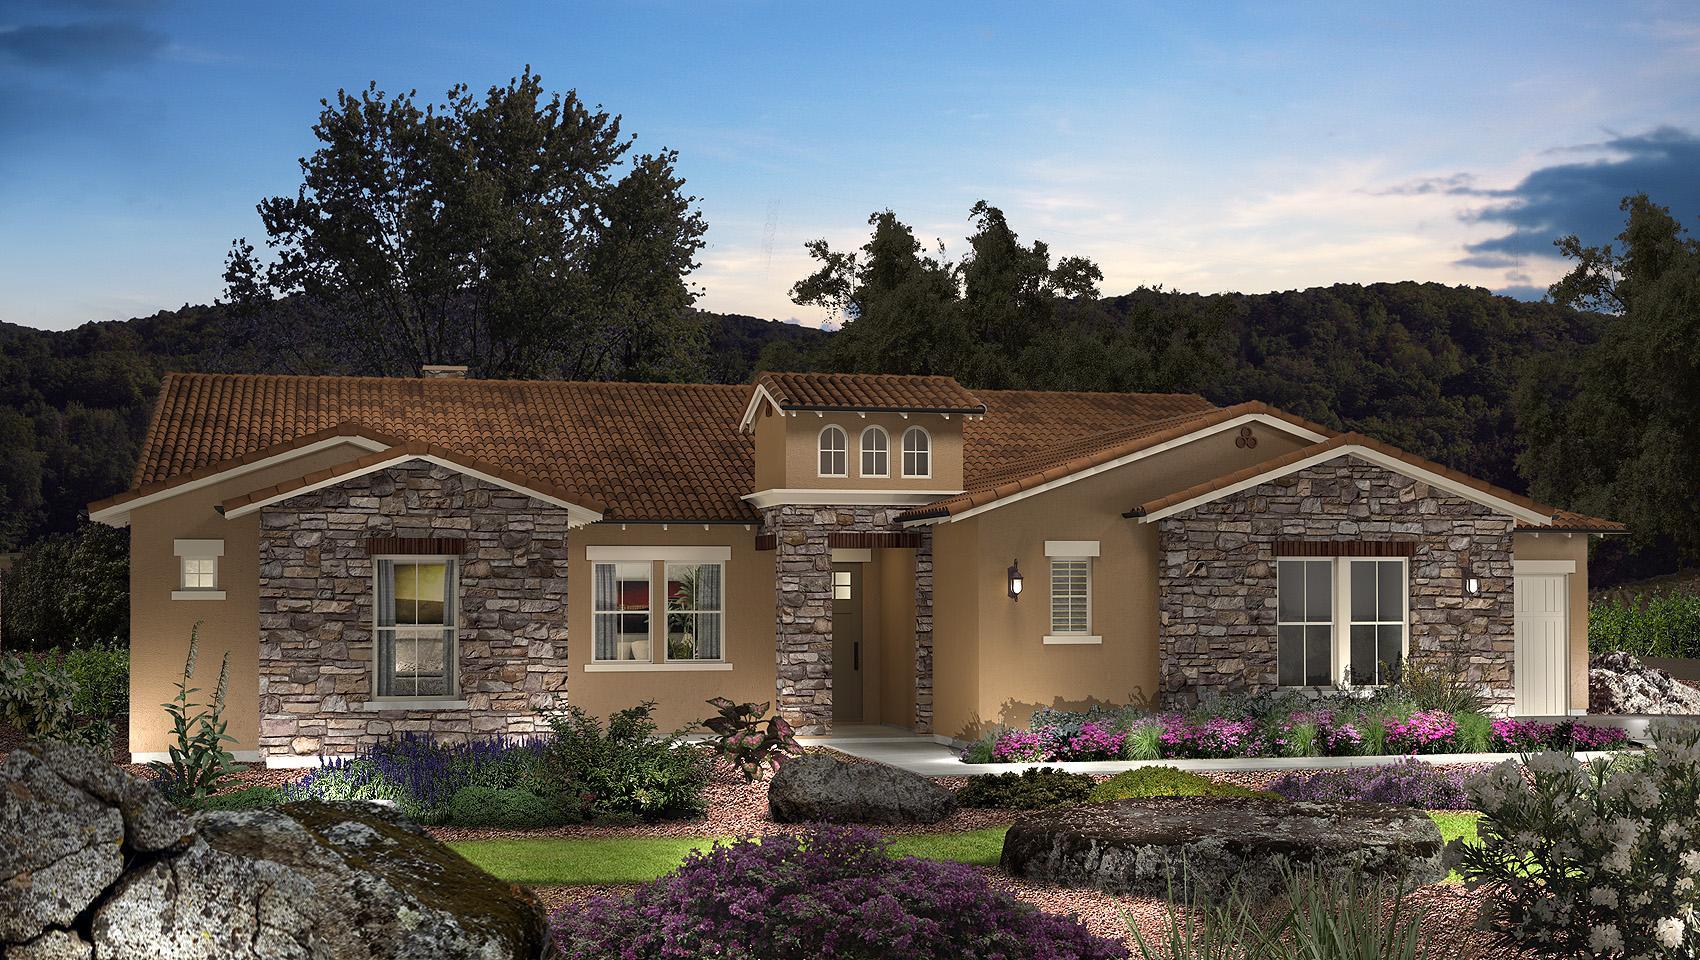 Elevation C - Wine Country:Residence 2